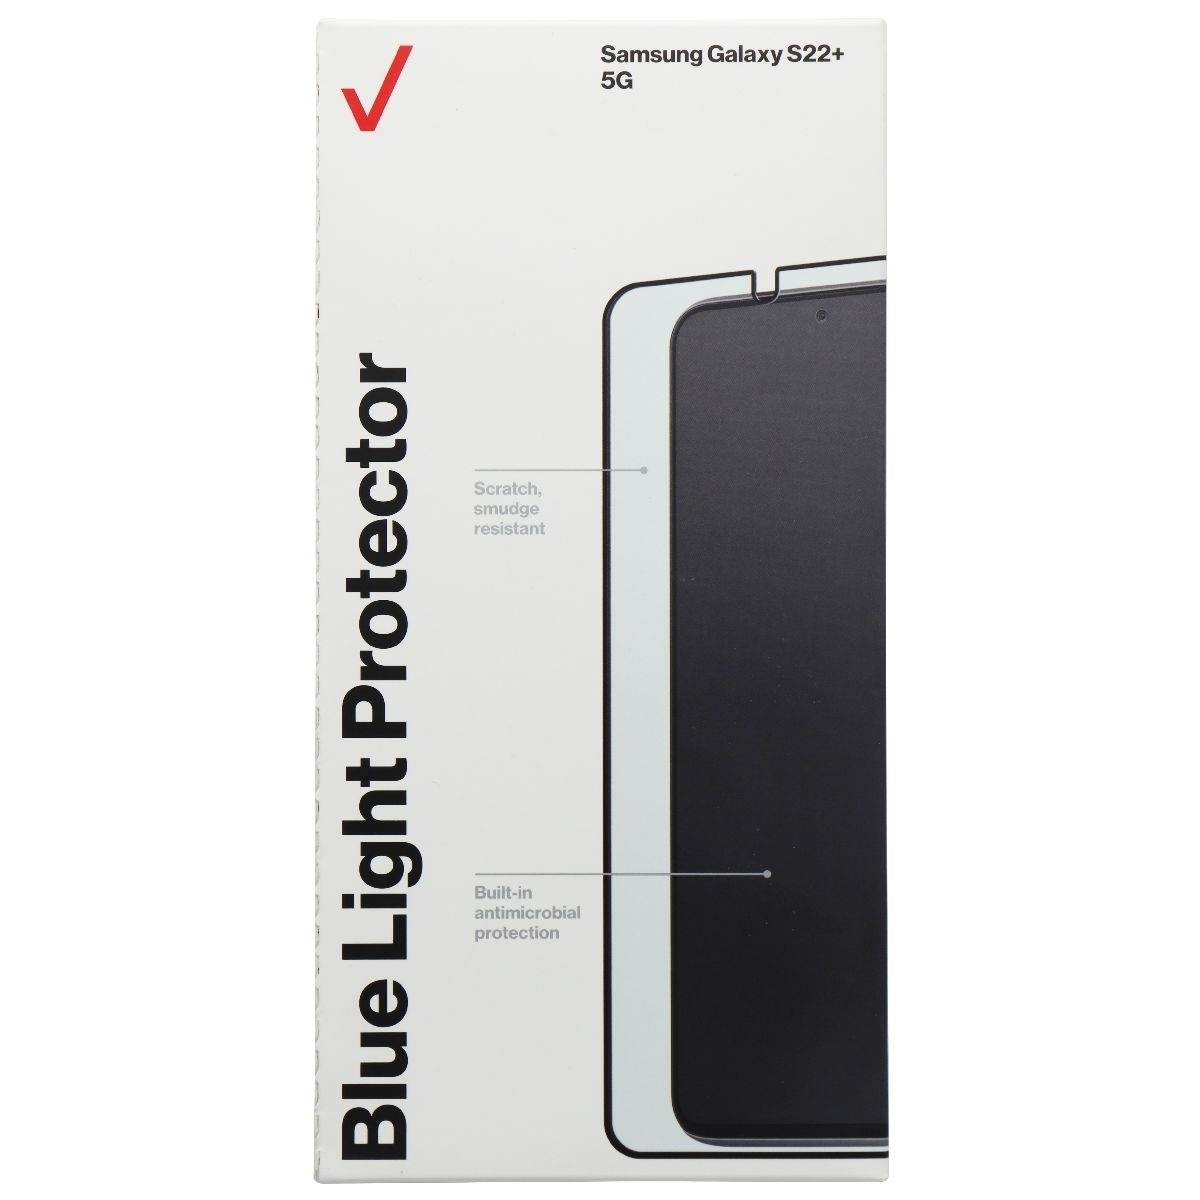 Verizon Blue Light Screen Protector For Samsung Galaxy S22+ 5G - Clear/Tinted